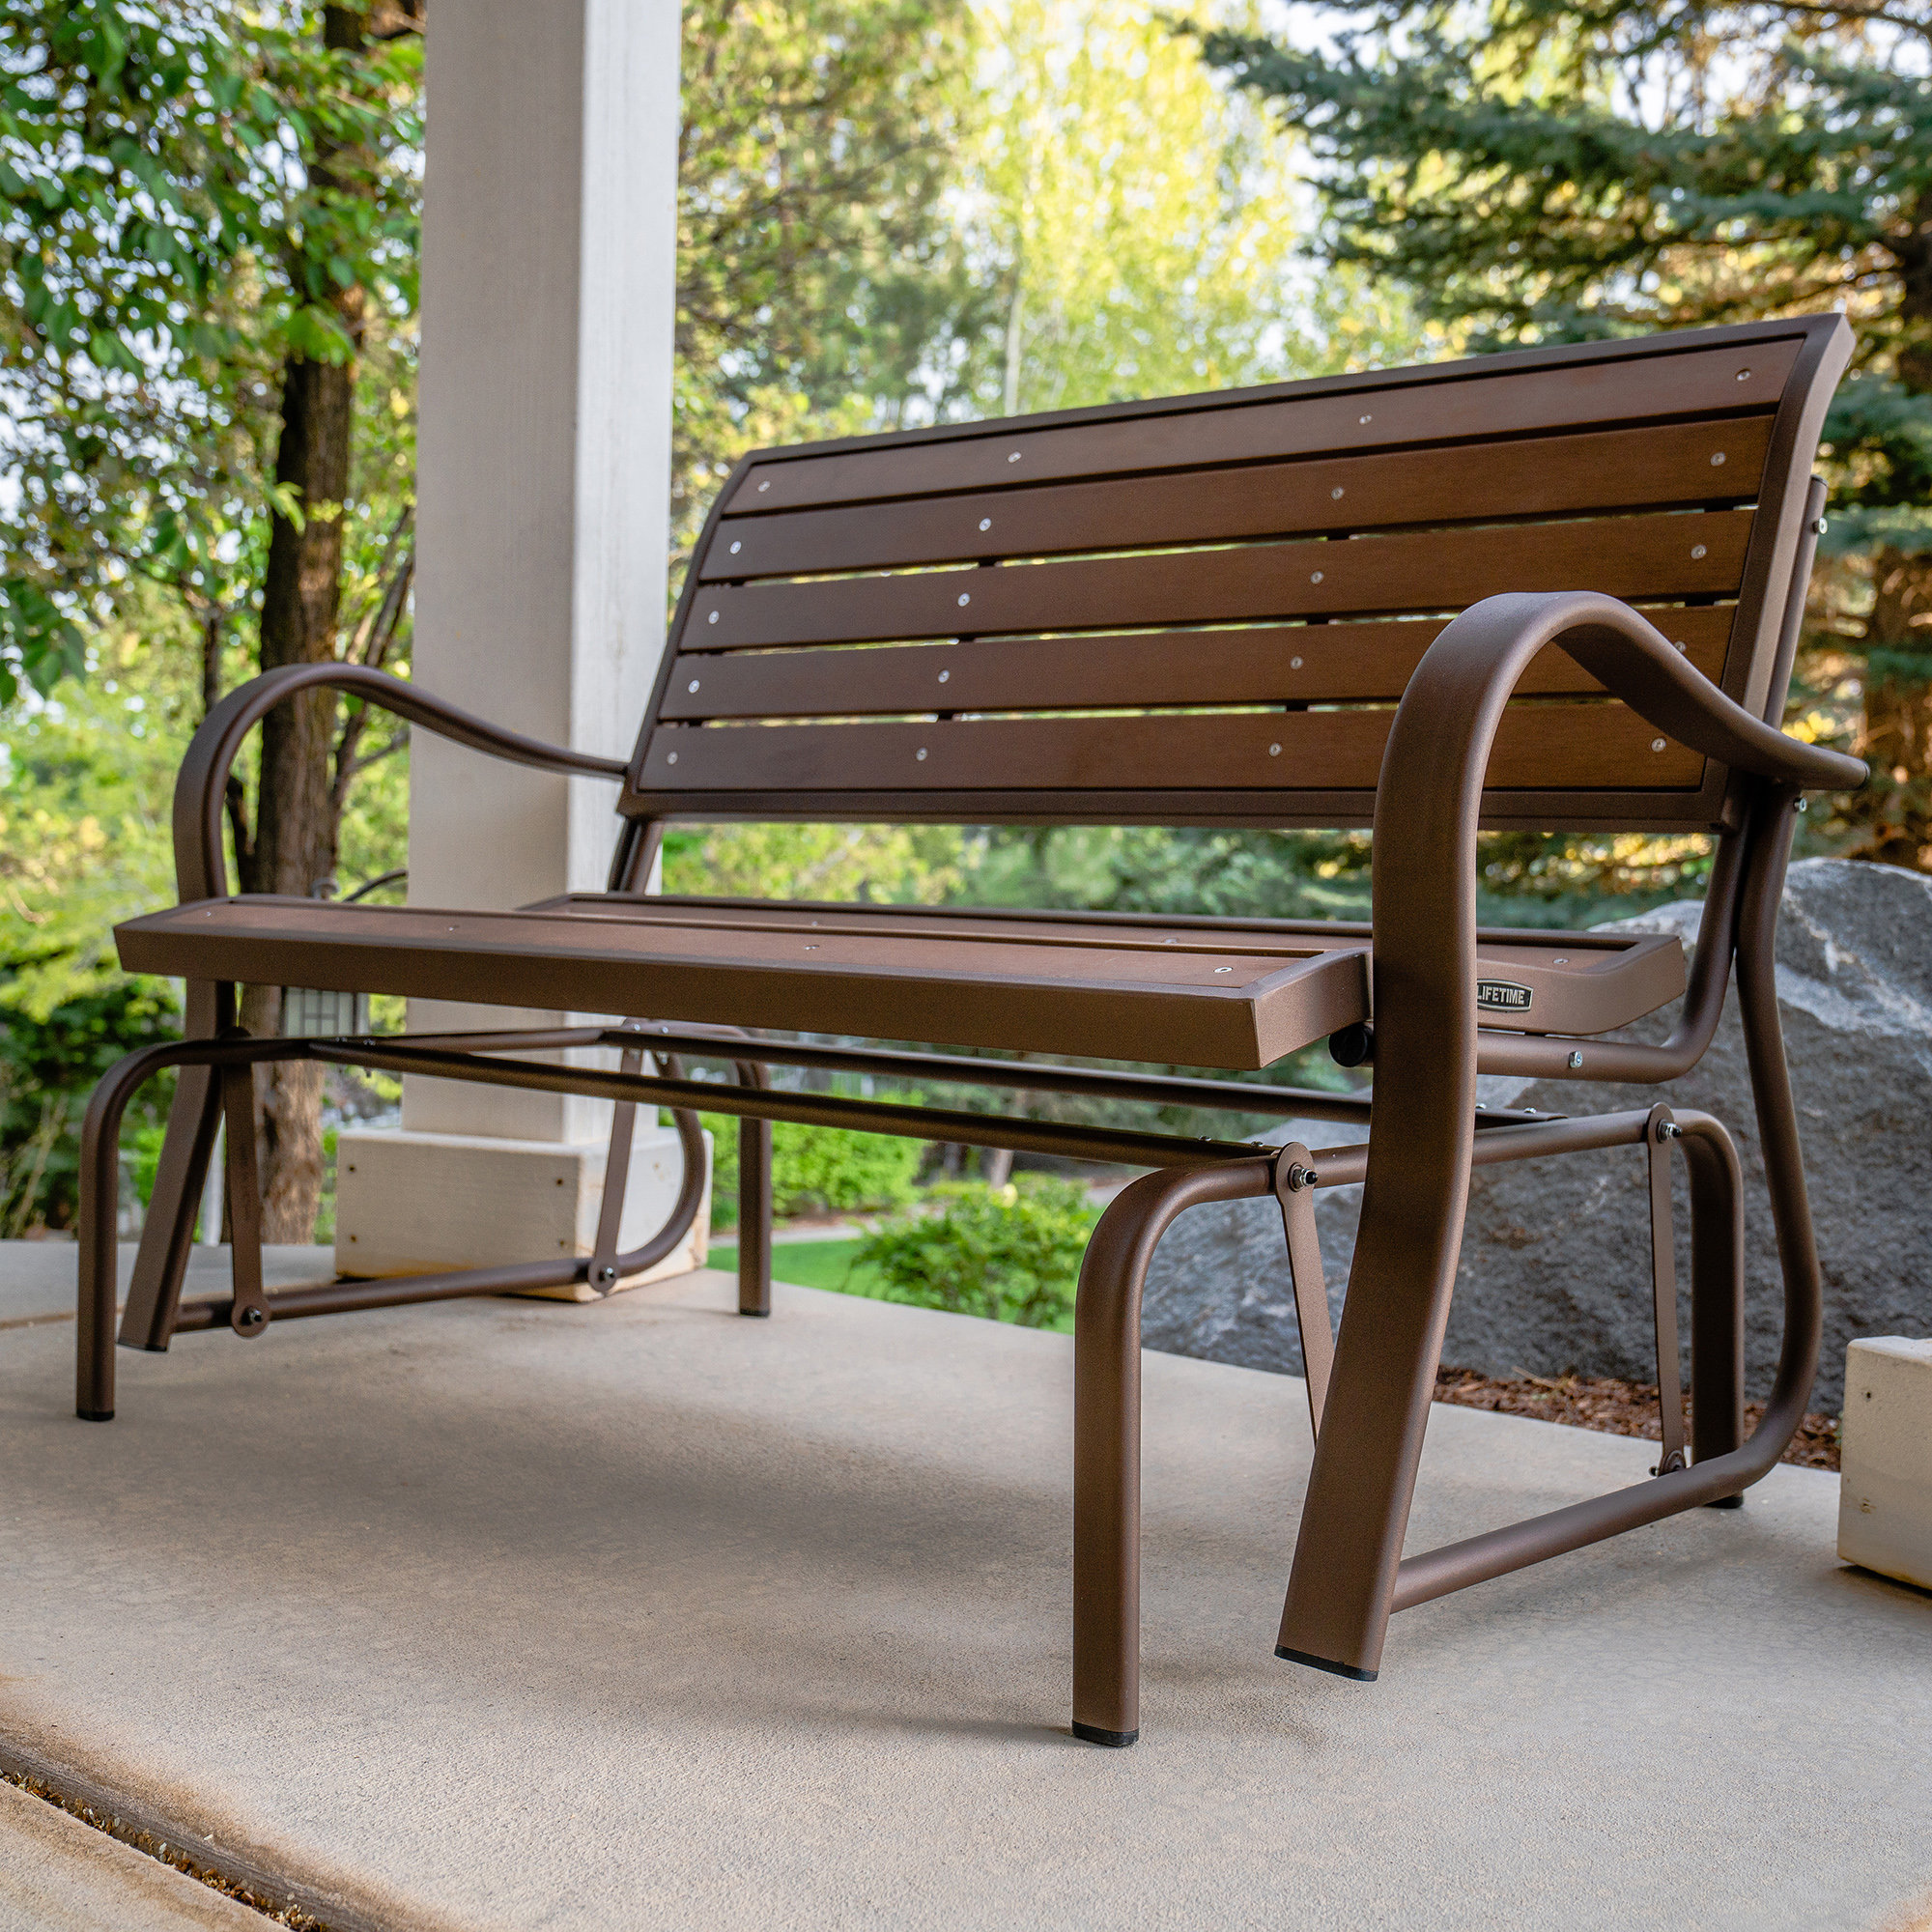 Image of Gliding patio bench